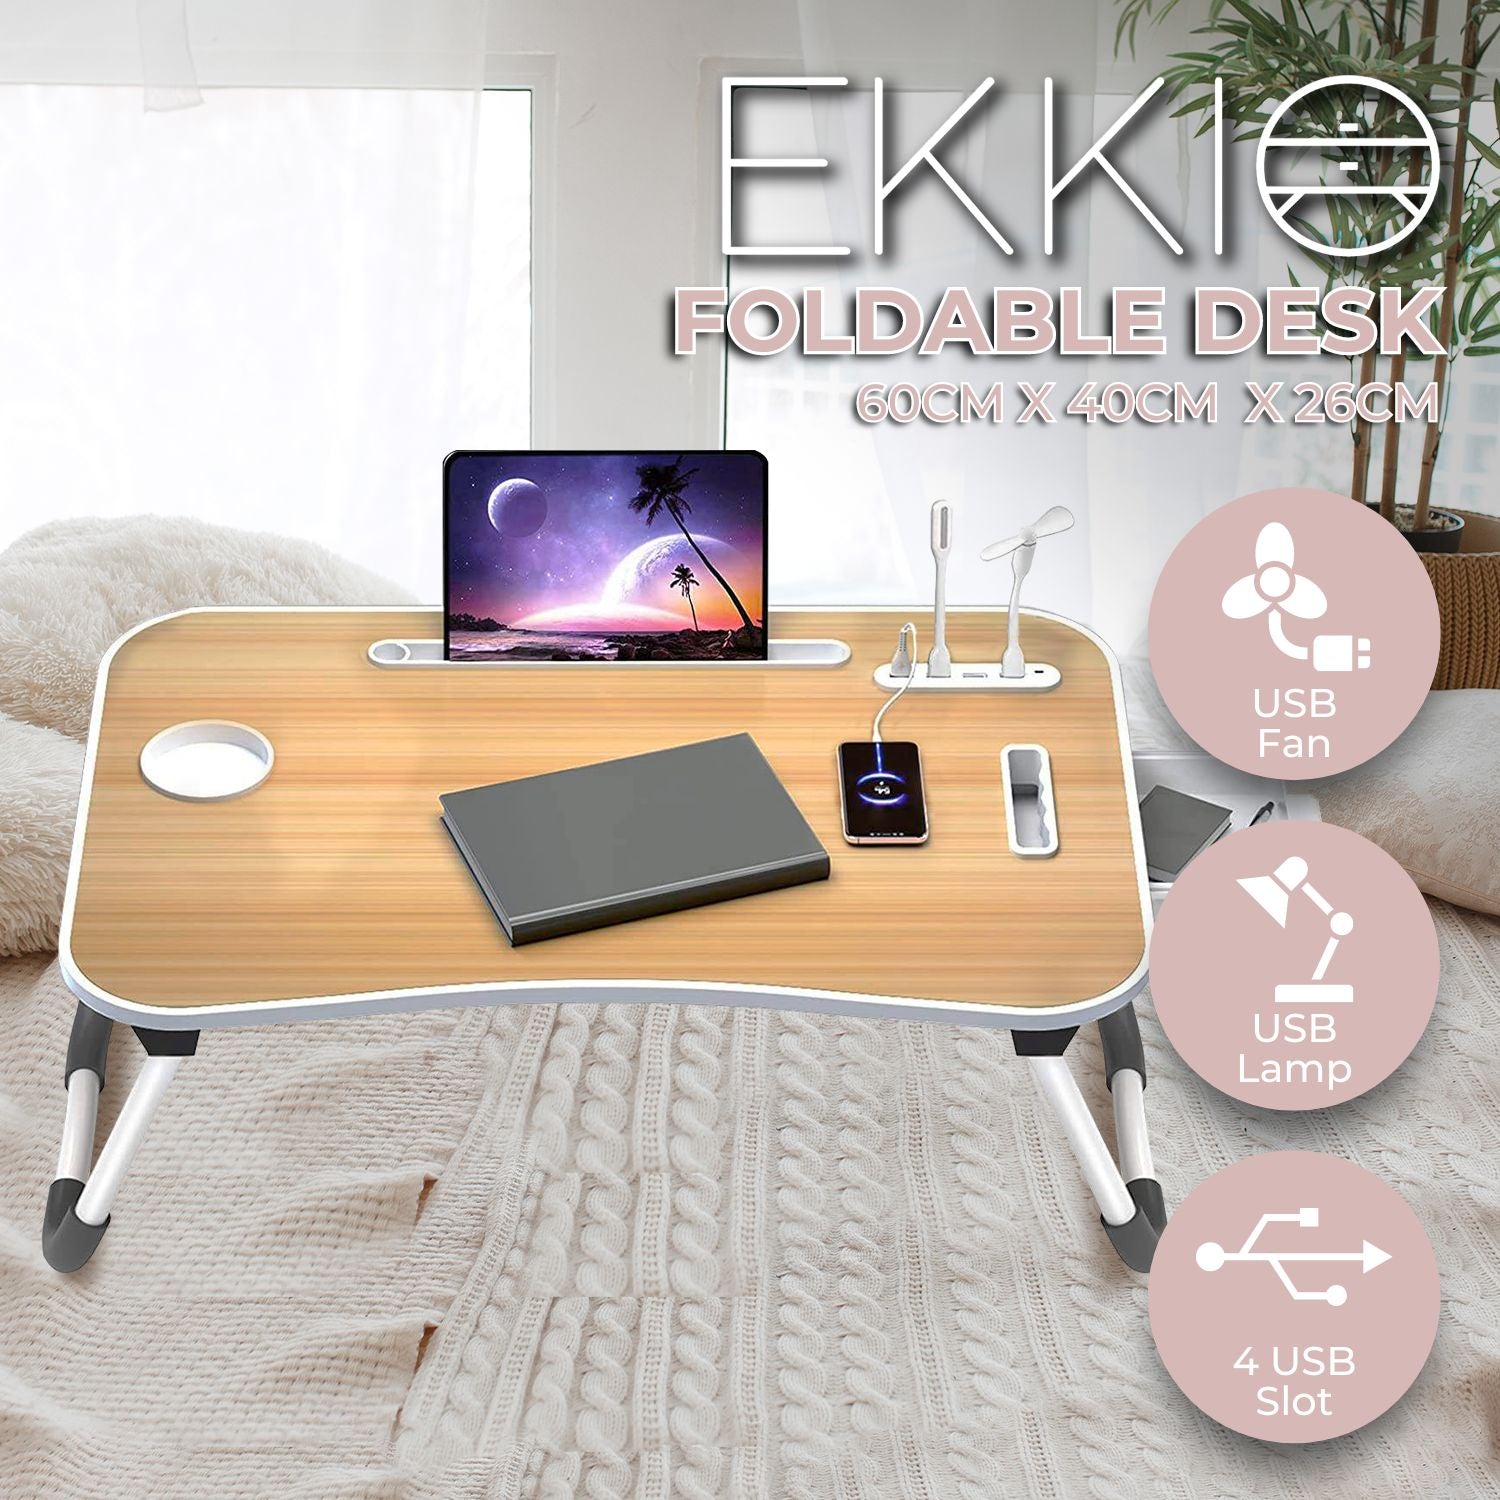 Multifunctional Portable Bed Tray Laptop Desk with USB Charge Port (burlywood)